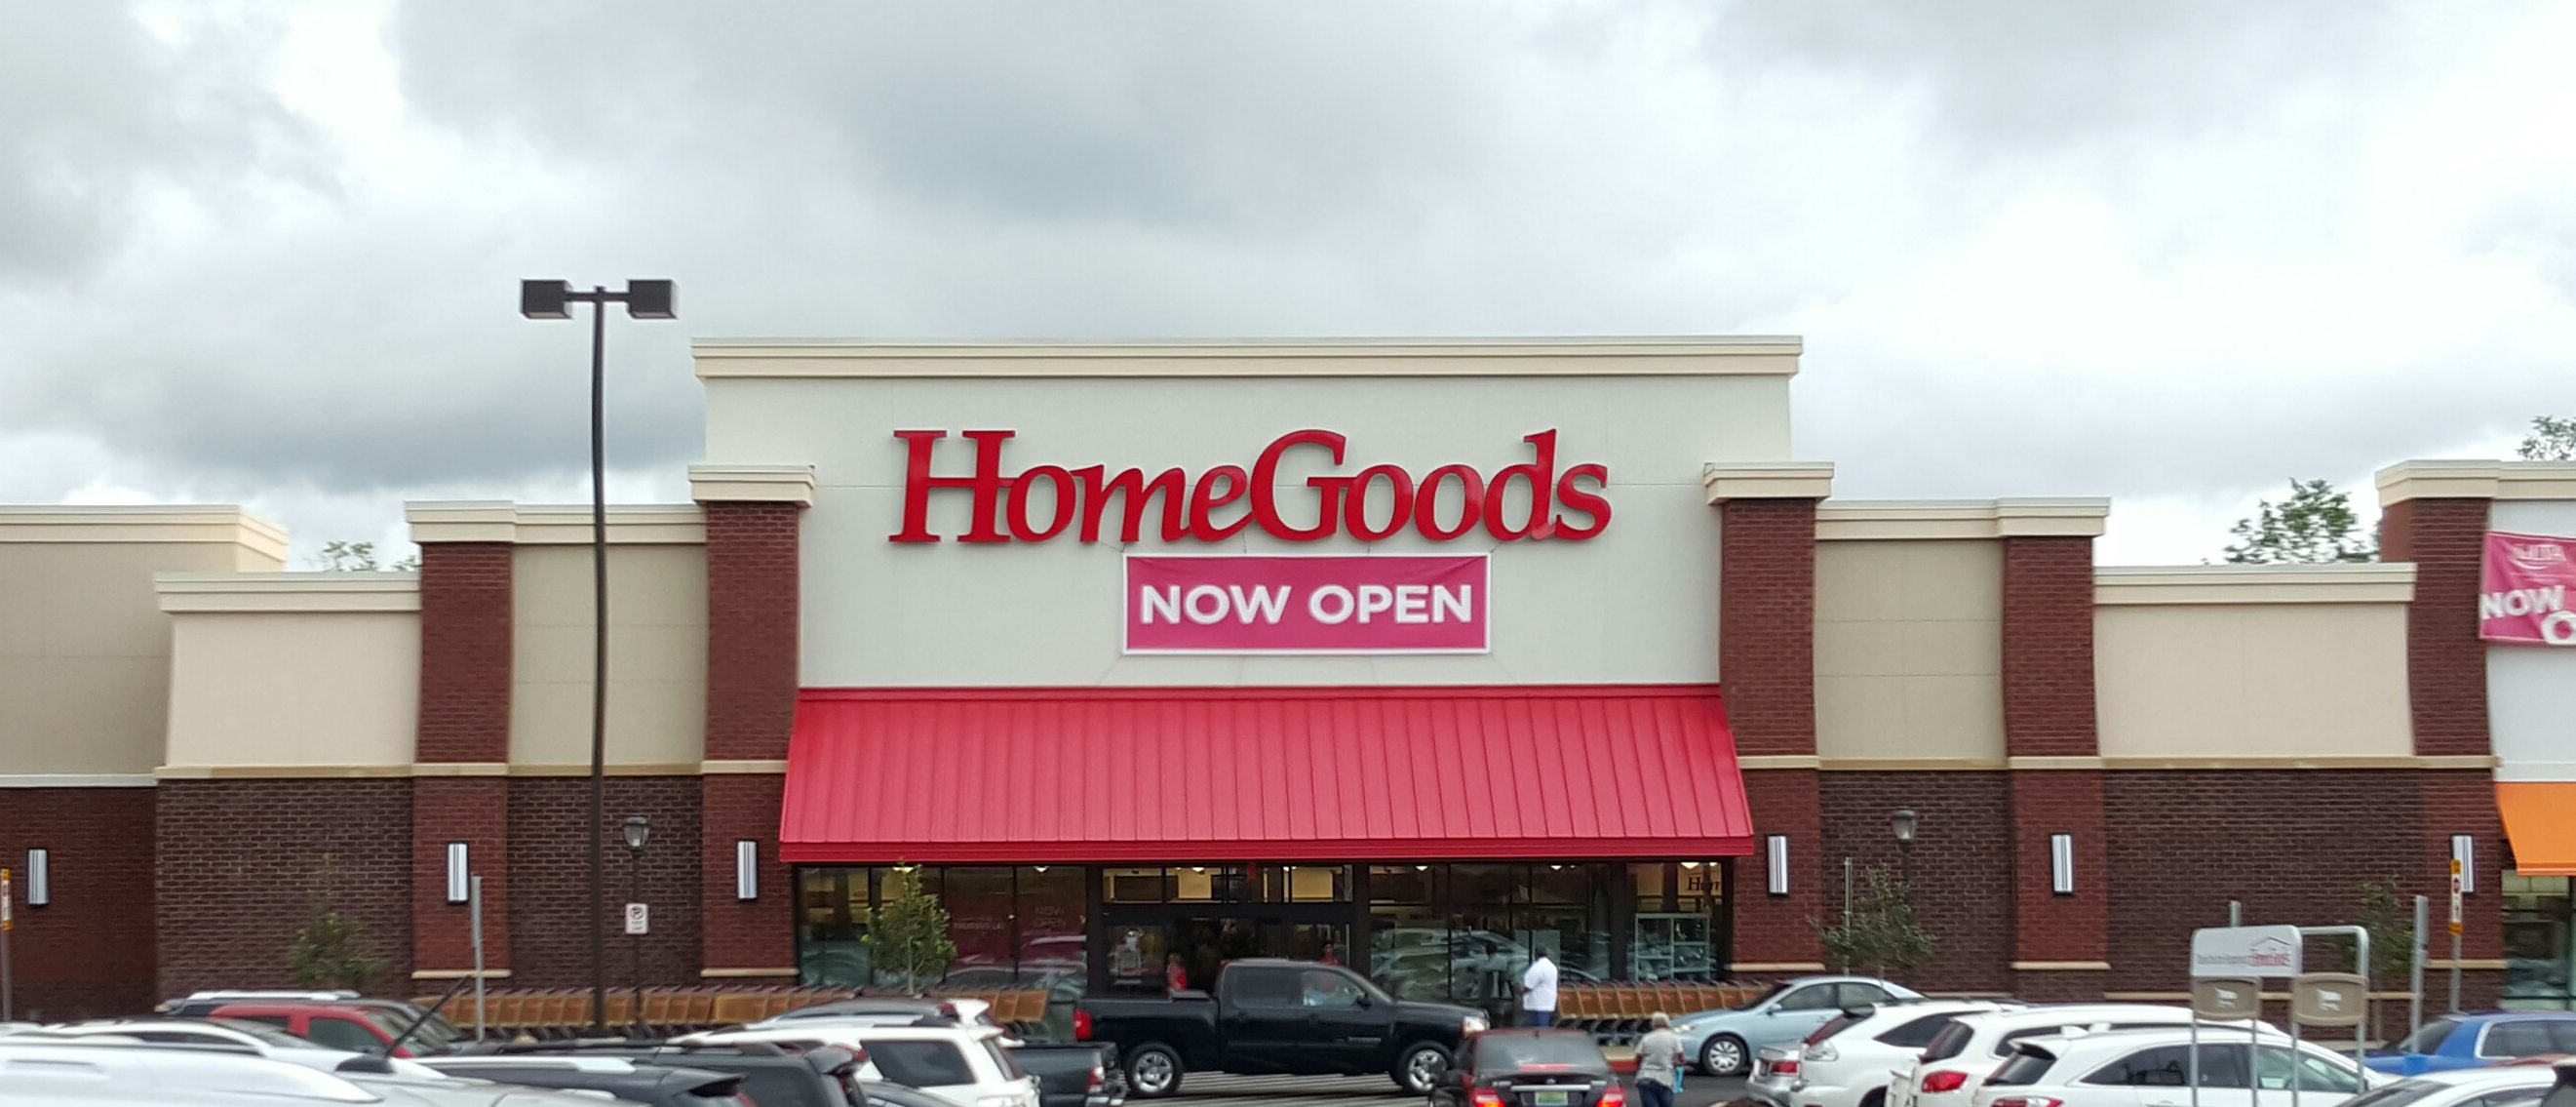 HomeGoods grand opening is today